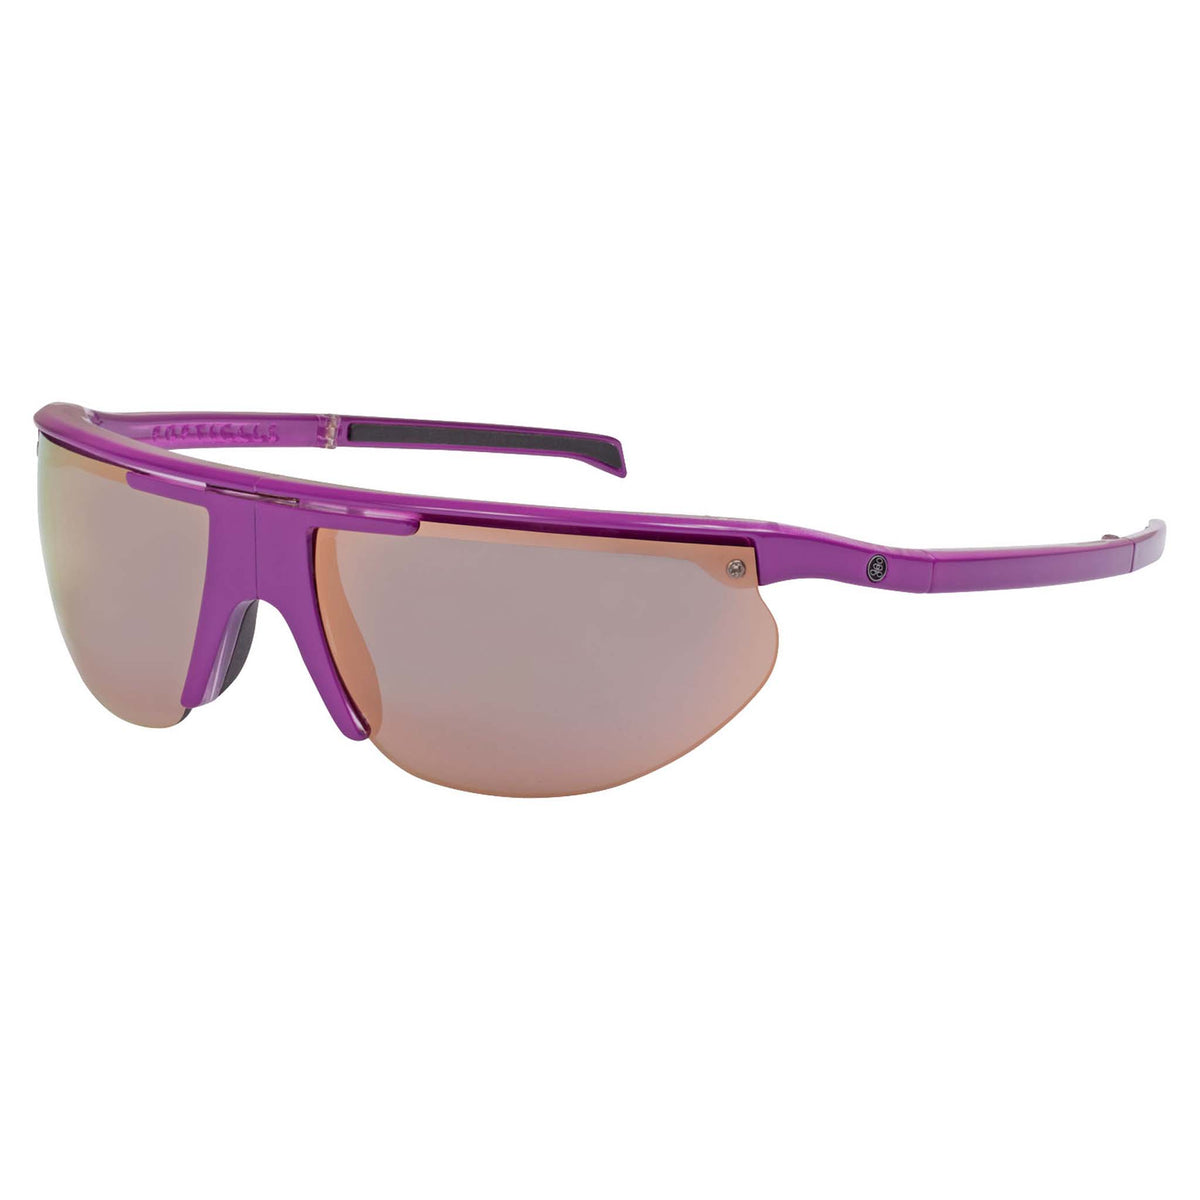 Popticals, Premium Compact Sunglasses, PopTrail, 030081-PFKN, Polarized Sunglasses, Gloss Lavender over Crystal Frame, Gray Lenses w/Pink Mirror Finish, Glam View